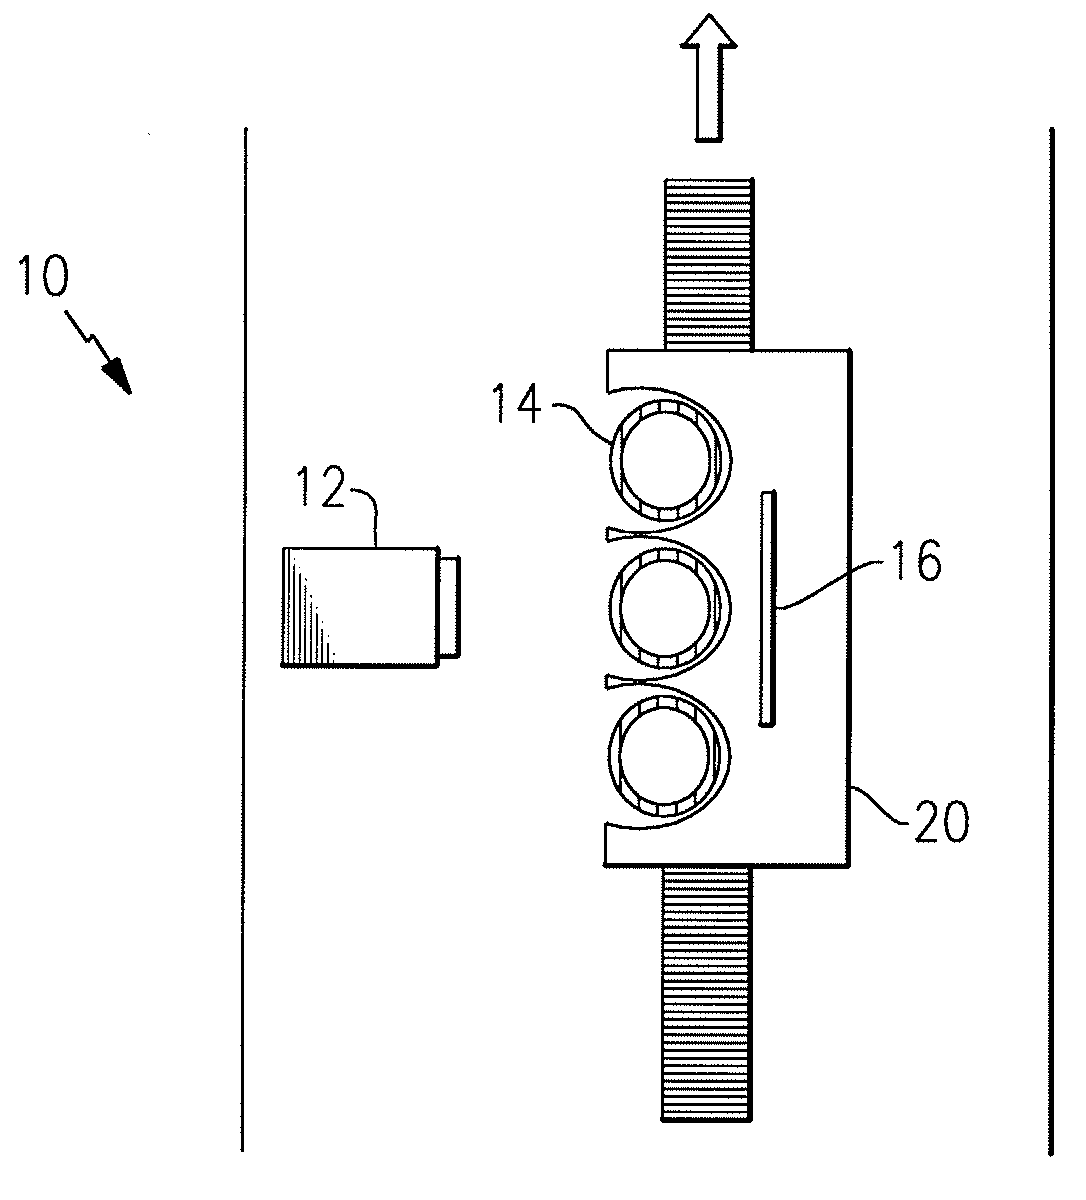 System and Method For Test Tube and Cap Identification